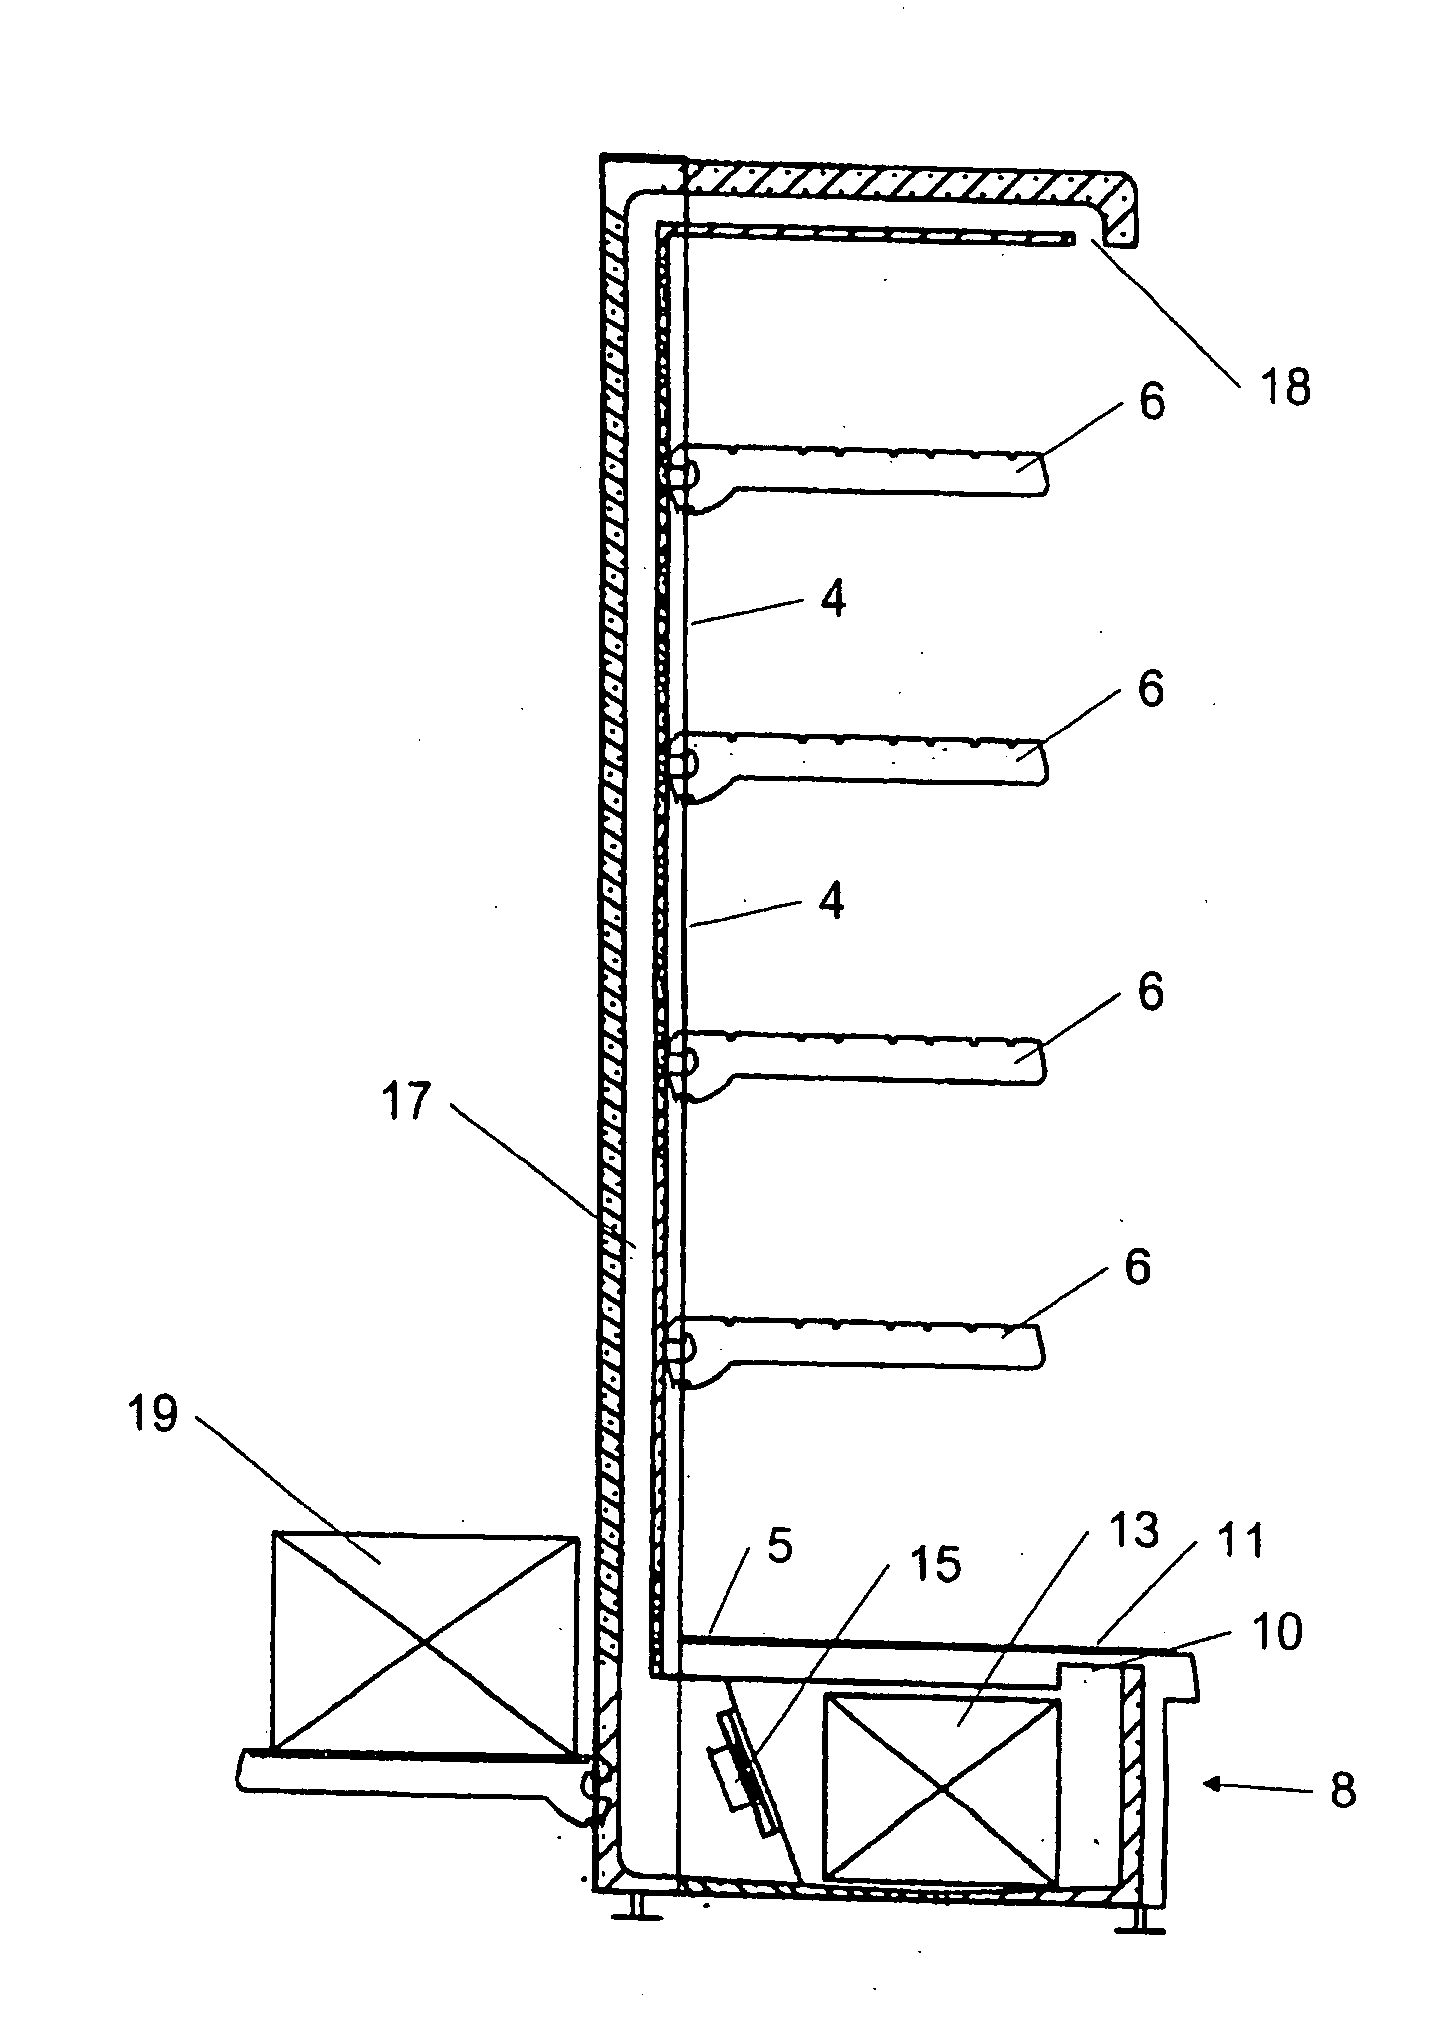 Cabinet for the storage of goods requiring refrigeration